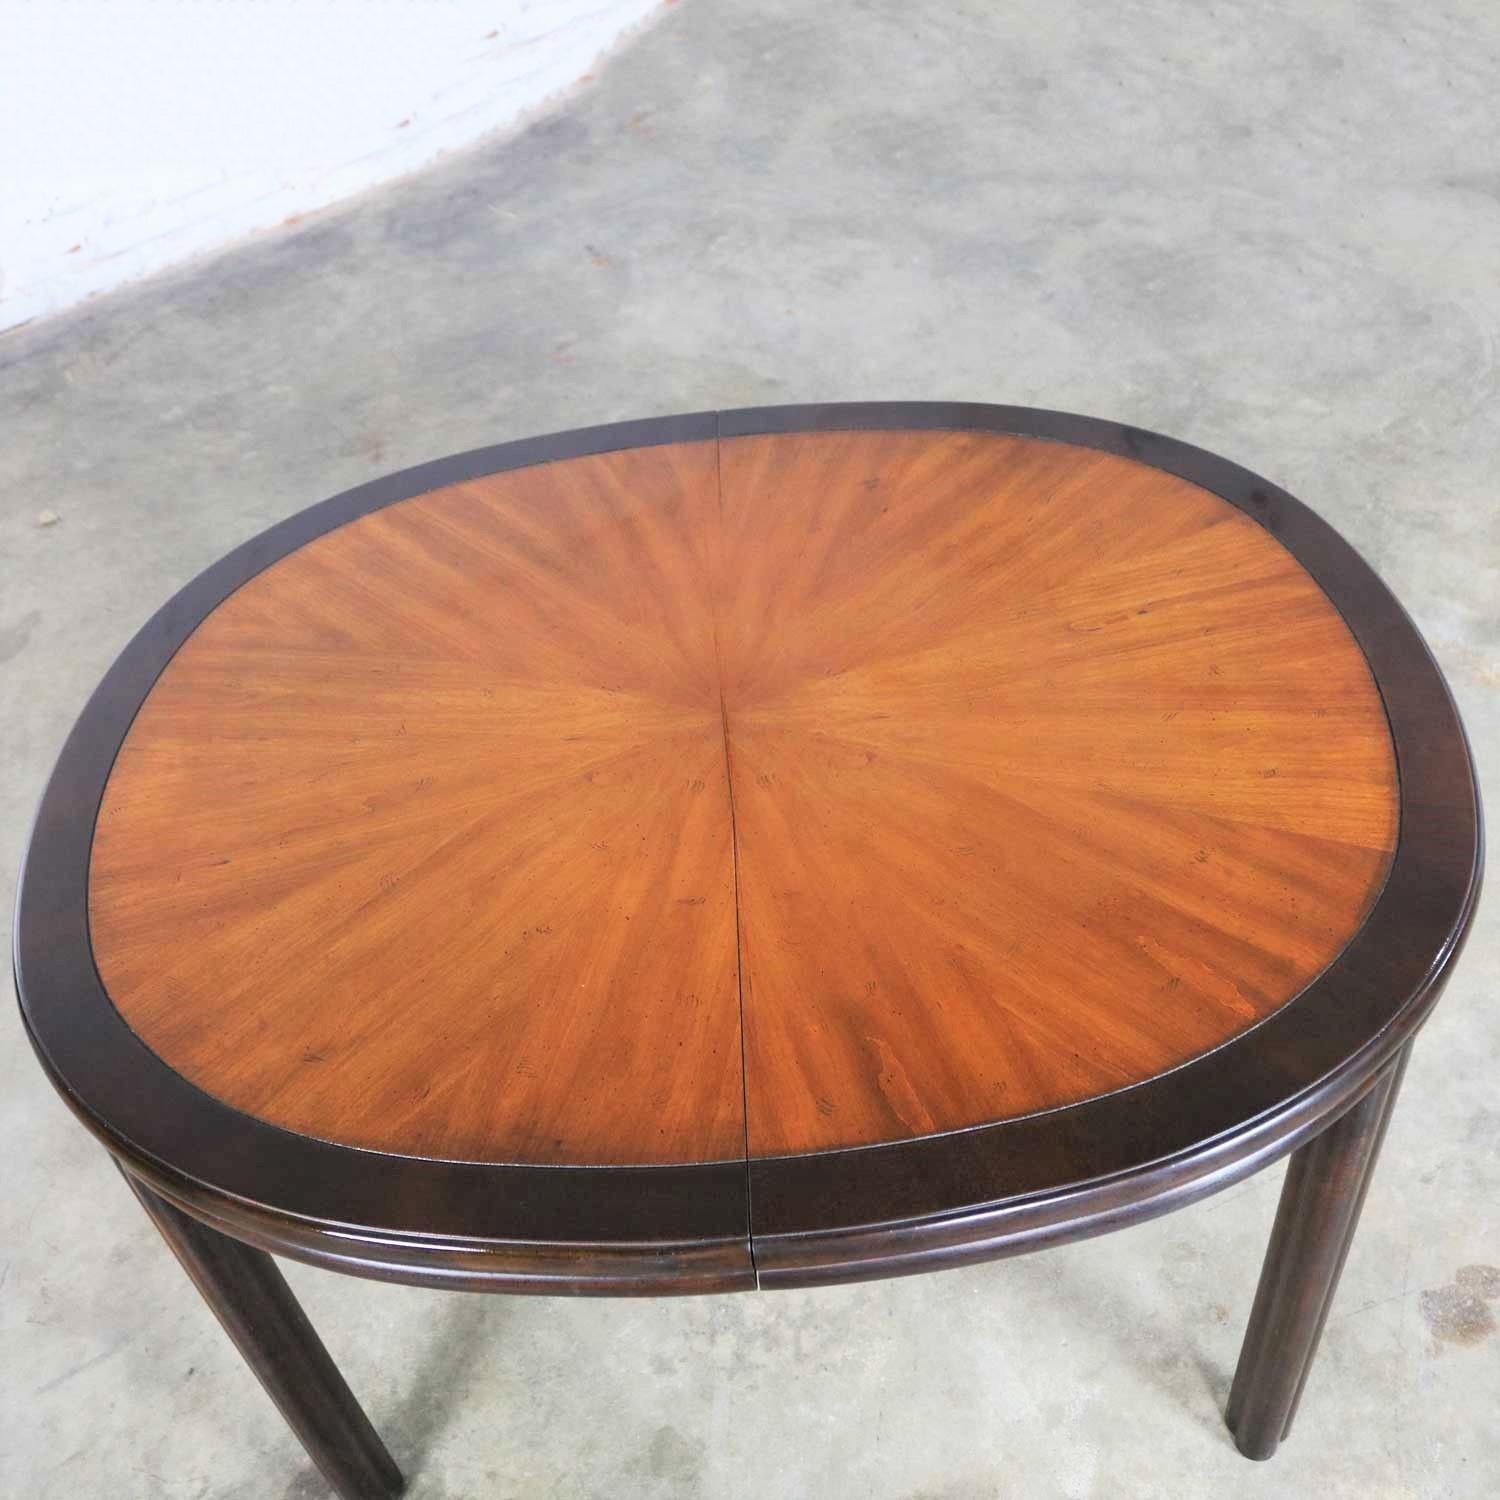 20th Century Drexel Ming Style Faux Bamboo Oval Dining Table Two Toned Finish & Two Leaves